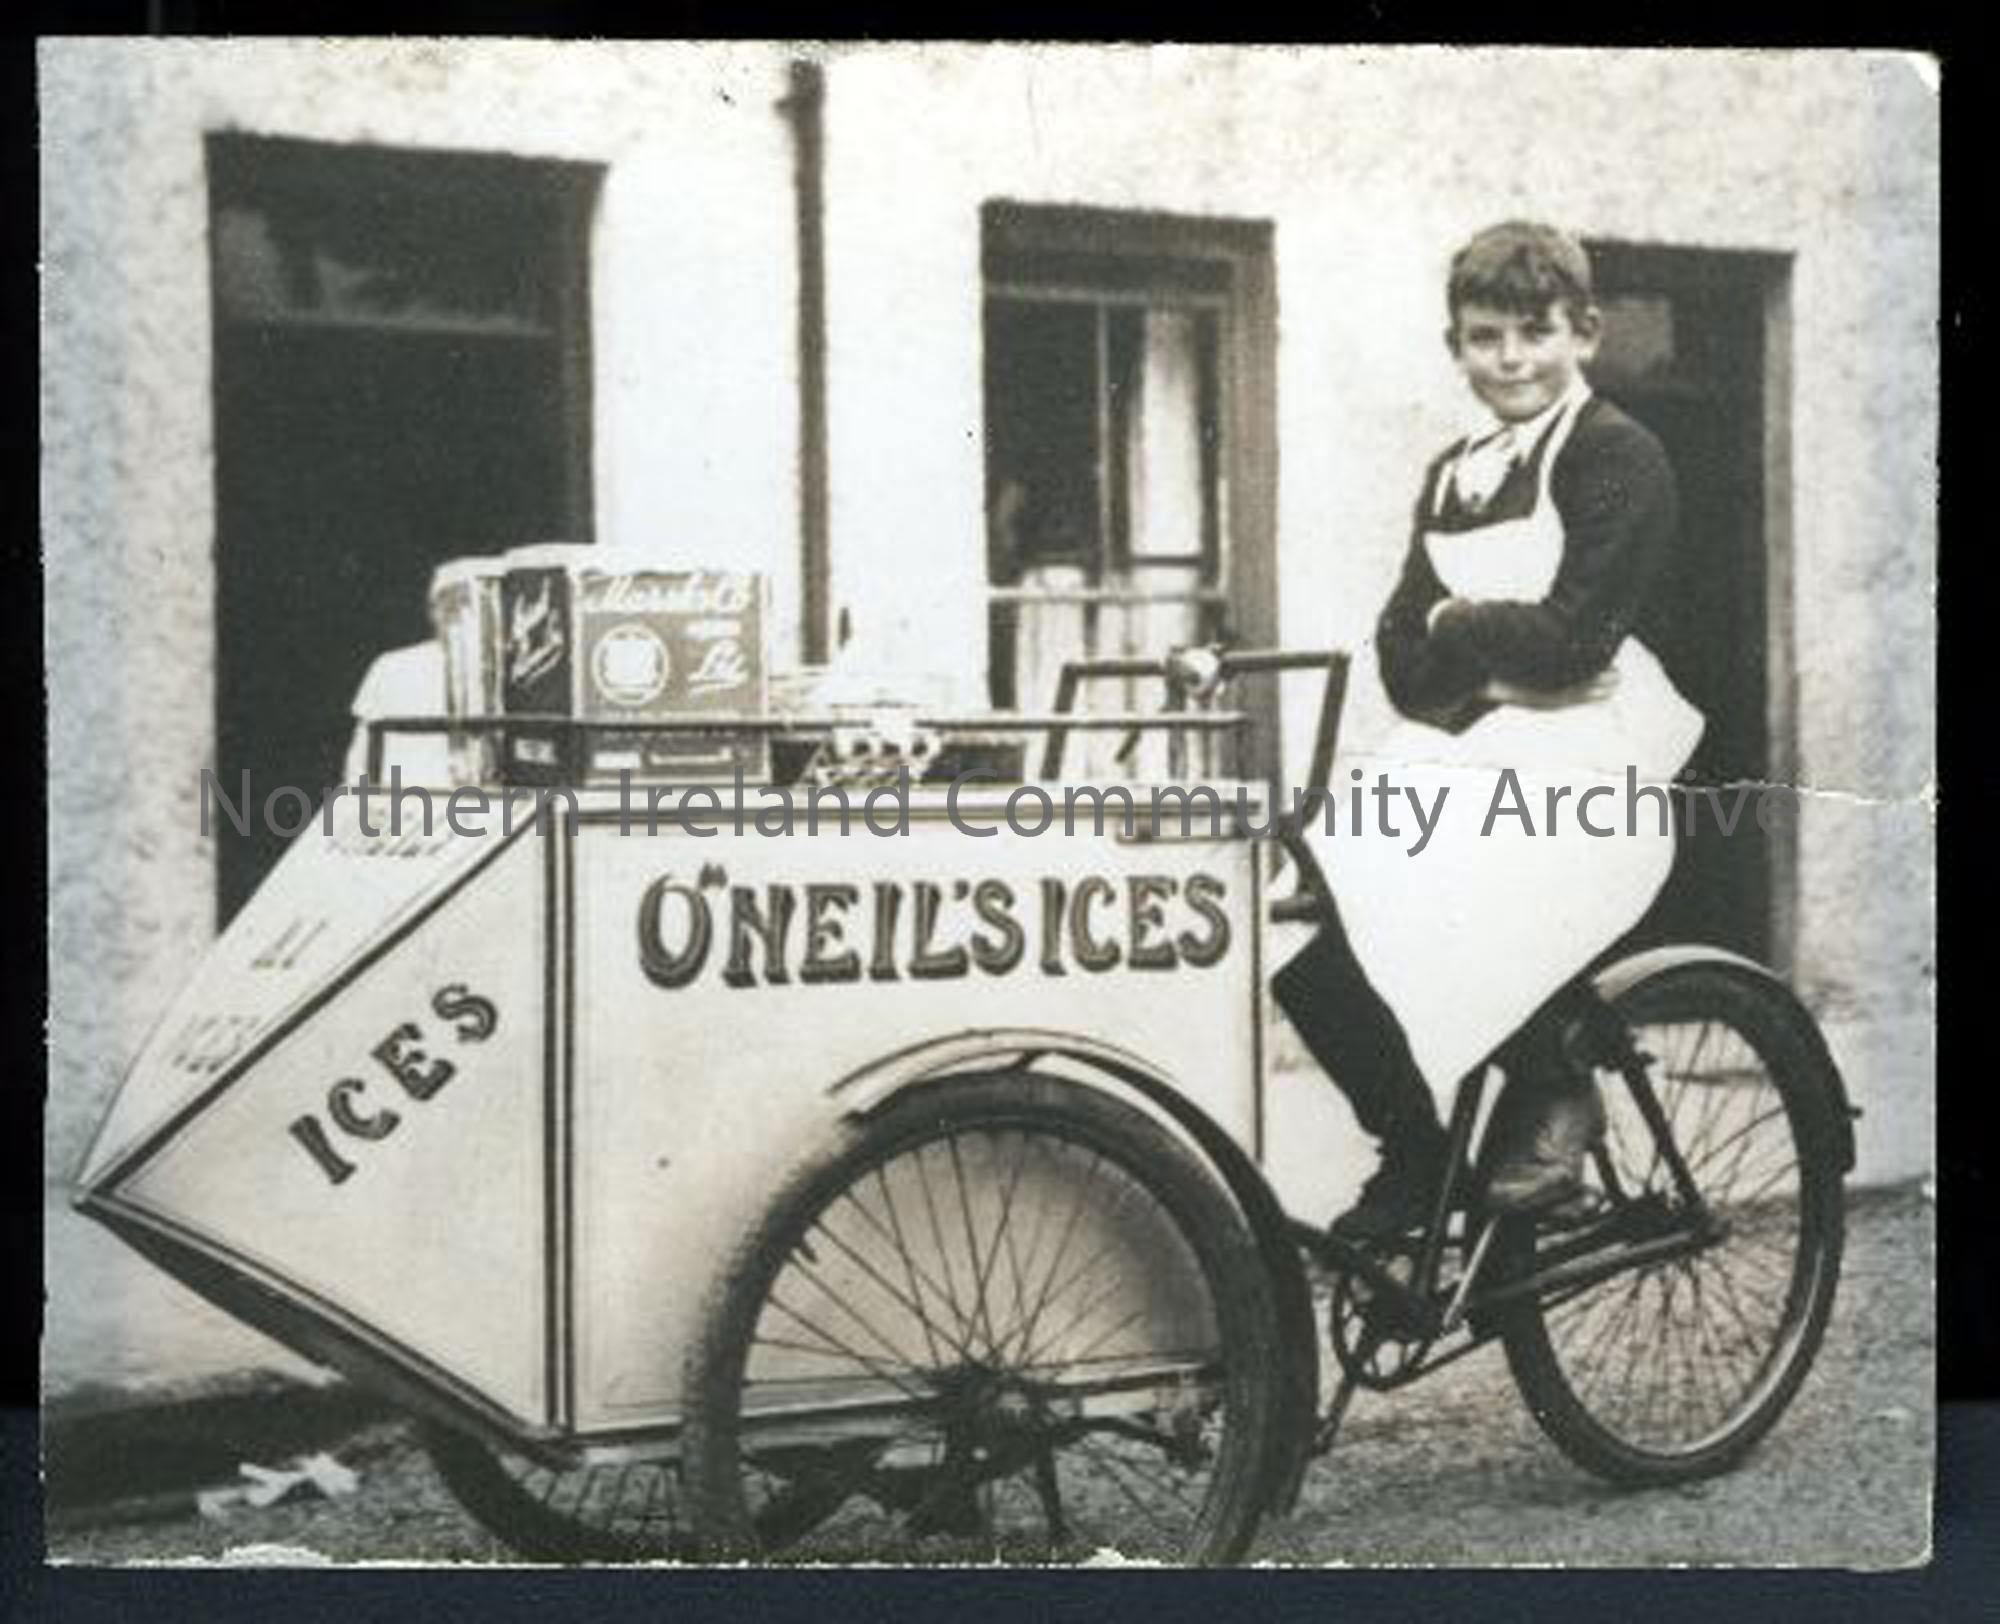 O’Neill’s Ices bicycle cart